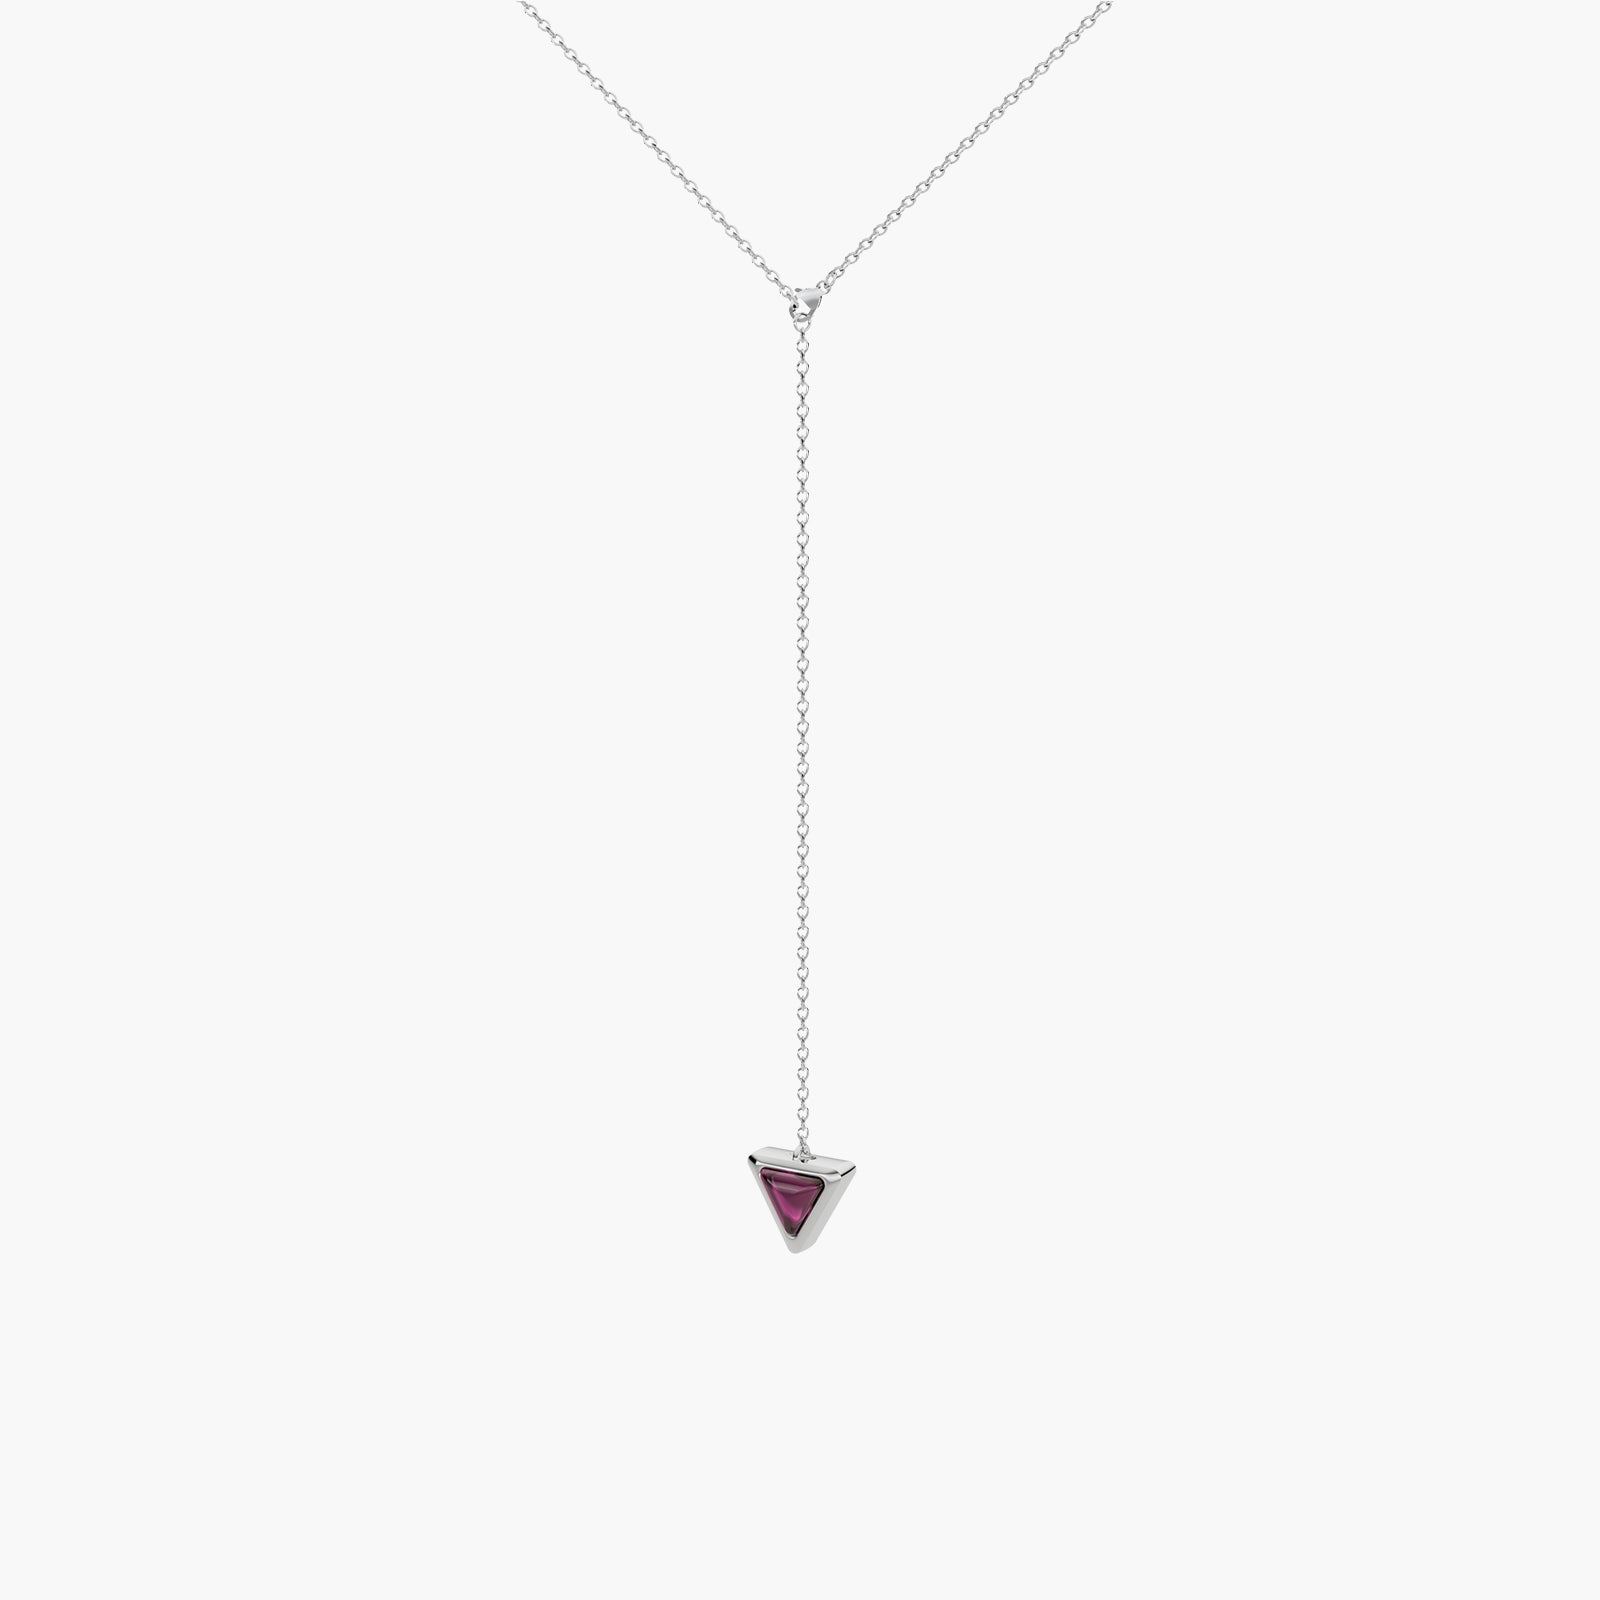 Necklace Multi Mirror Exquisite White Gold Pink Garnet and Diamonds